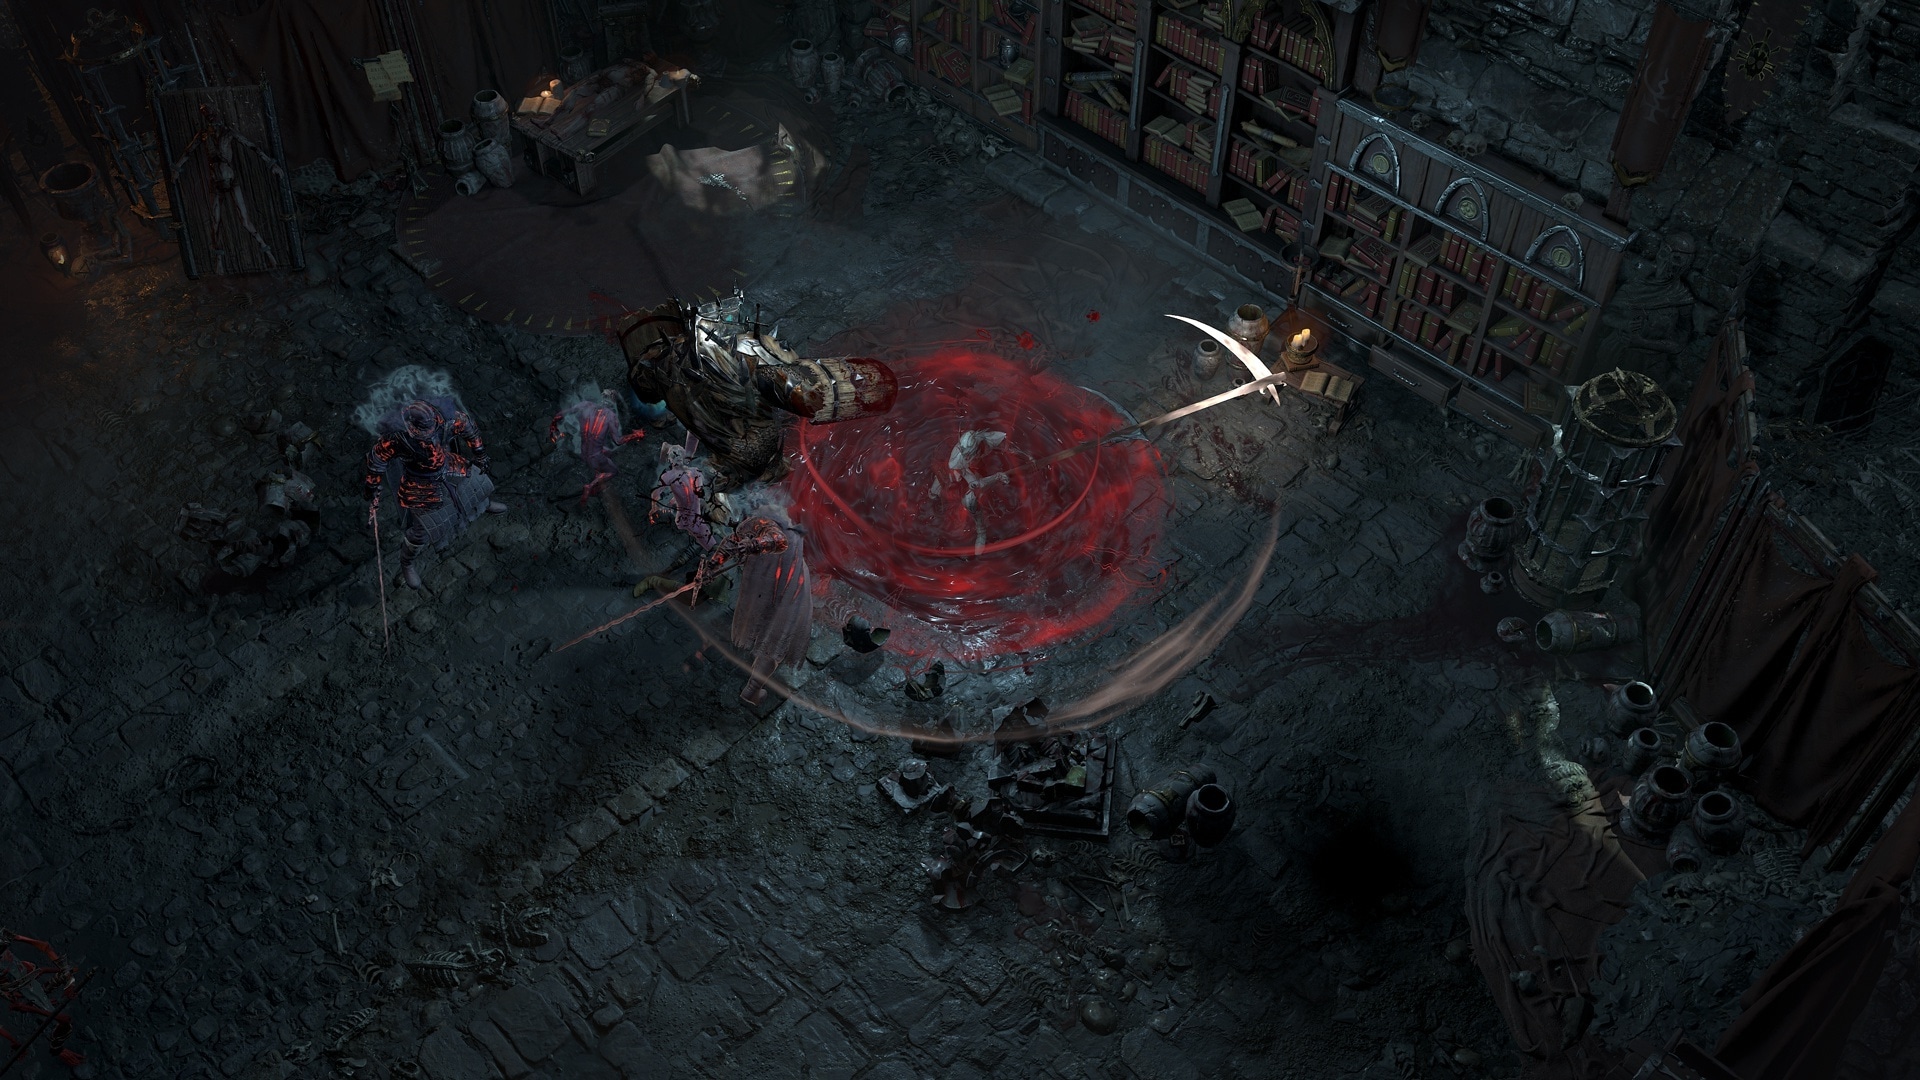 Season of Blood is Dripping into Sanctuary — Diablo IV — Blizzard News